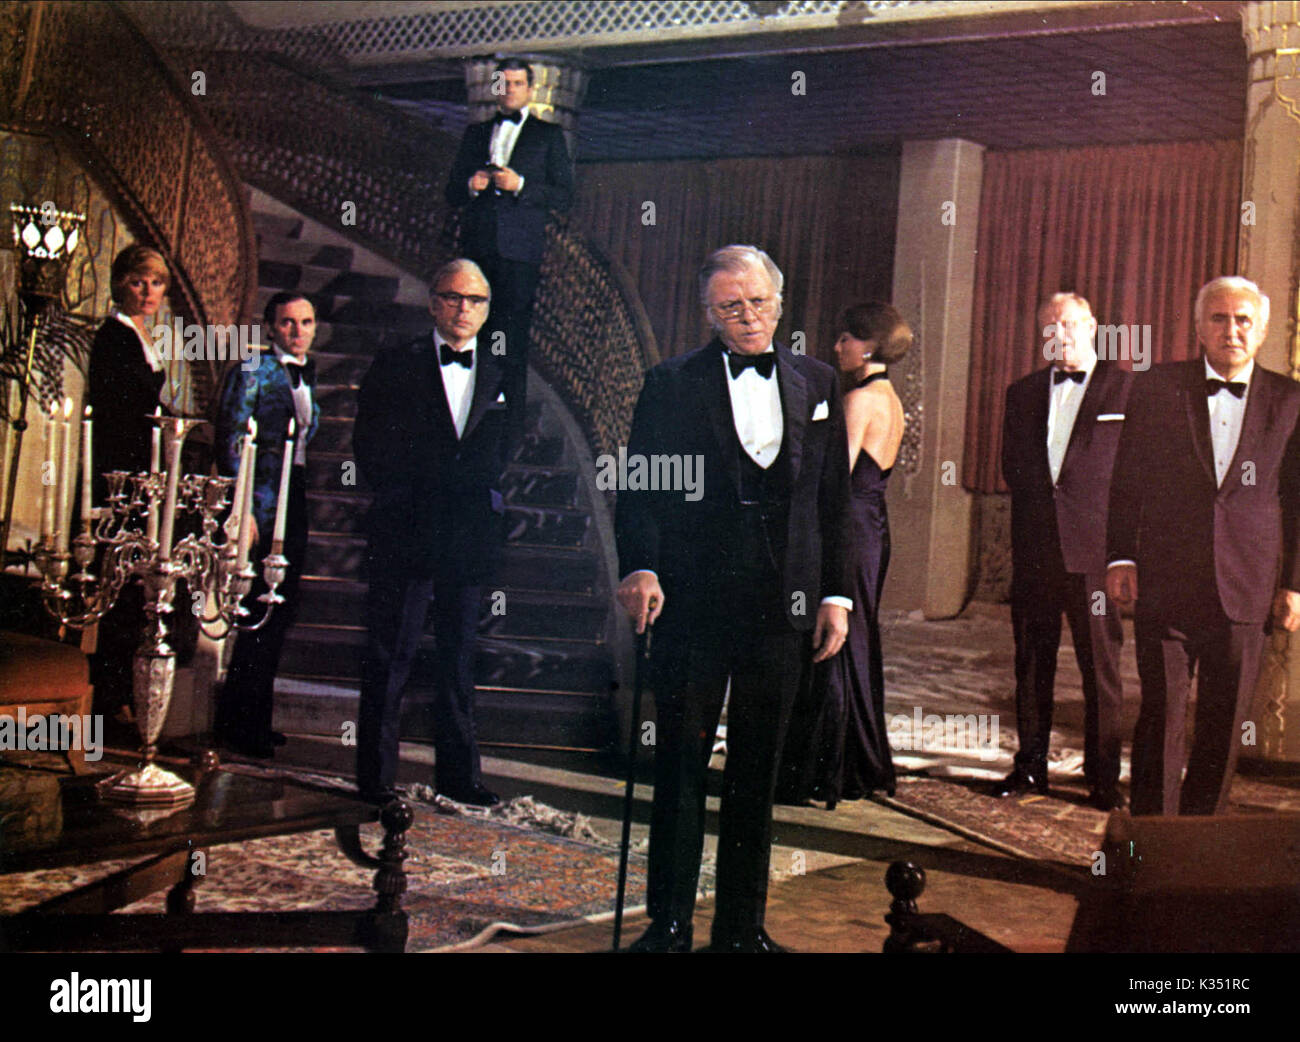 AND THEN THERE WERE NONE  ELKE SOMMER, CHARLES AZNAVOUR, HERBERT LOM, OLIVER REED, RICHARD ATTENBOROUGH, STEPHANE AUDRAN, GERT FROBE, ADOLFO CELI     Date: 1974 Stock Photo